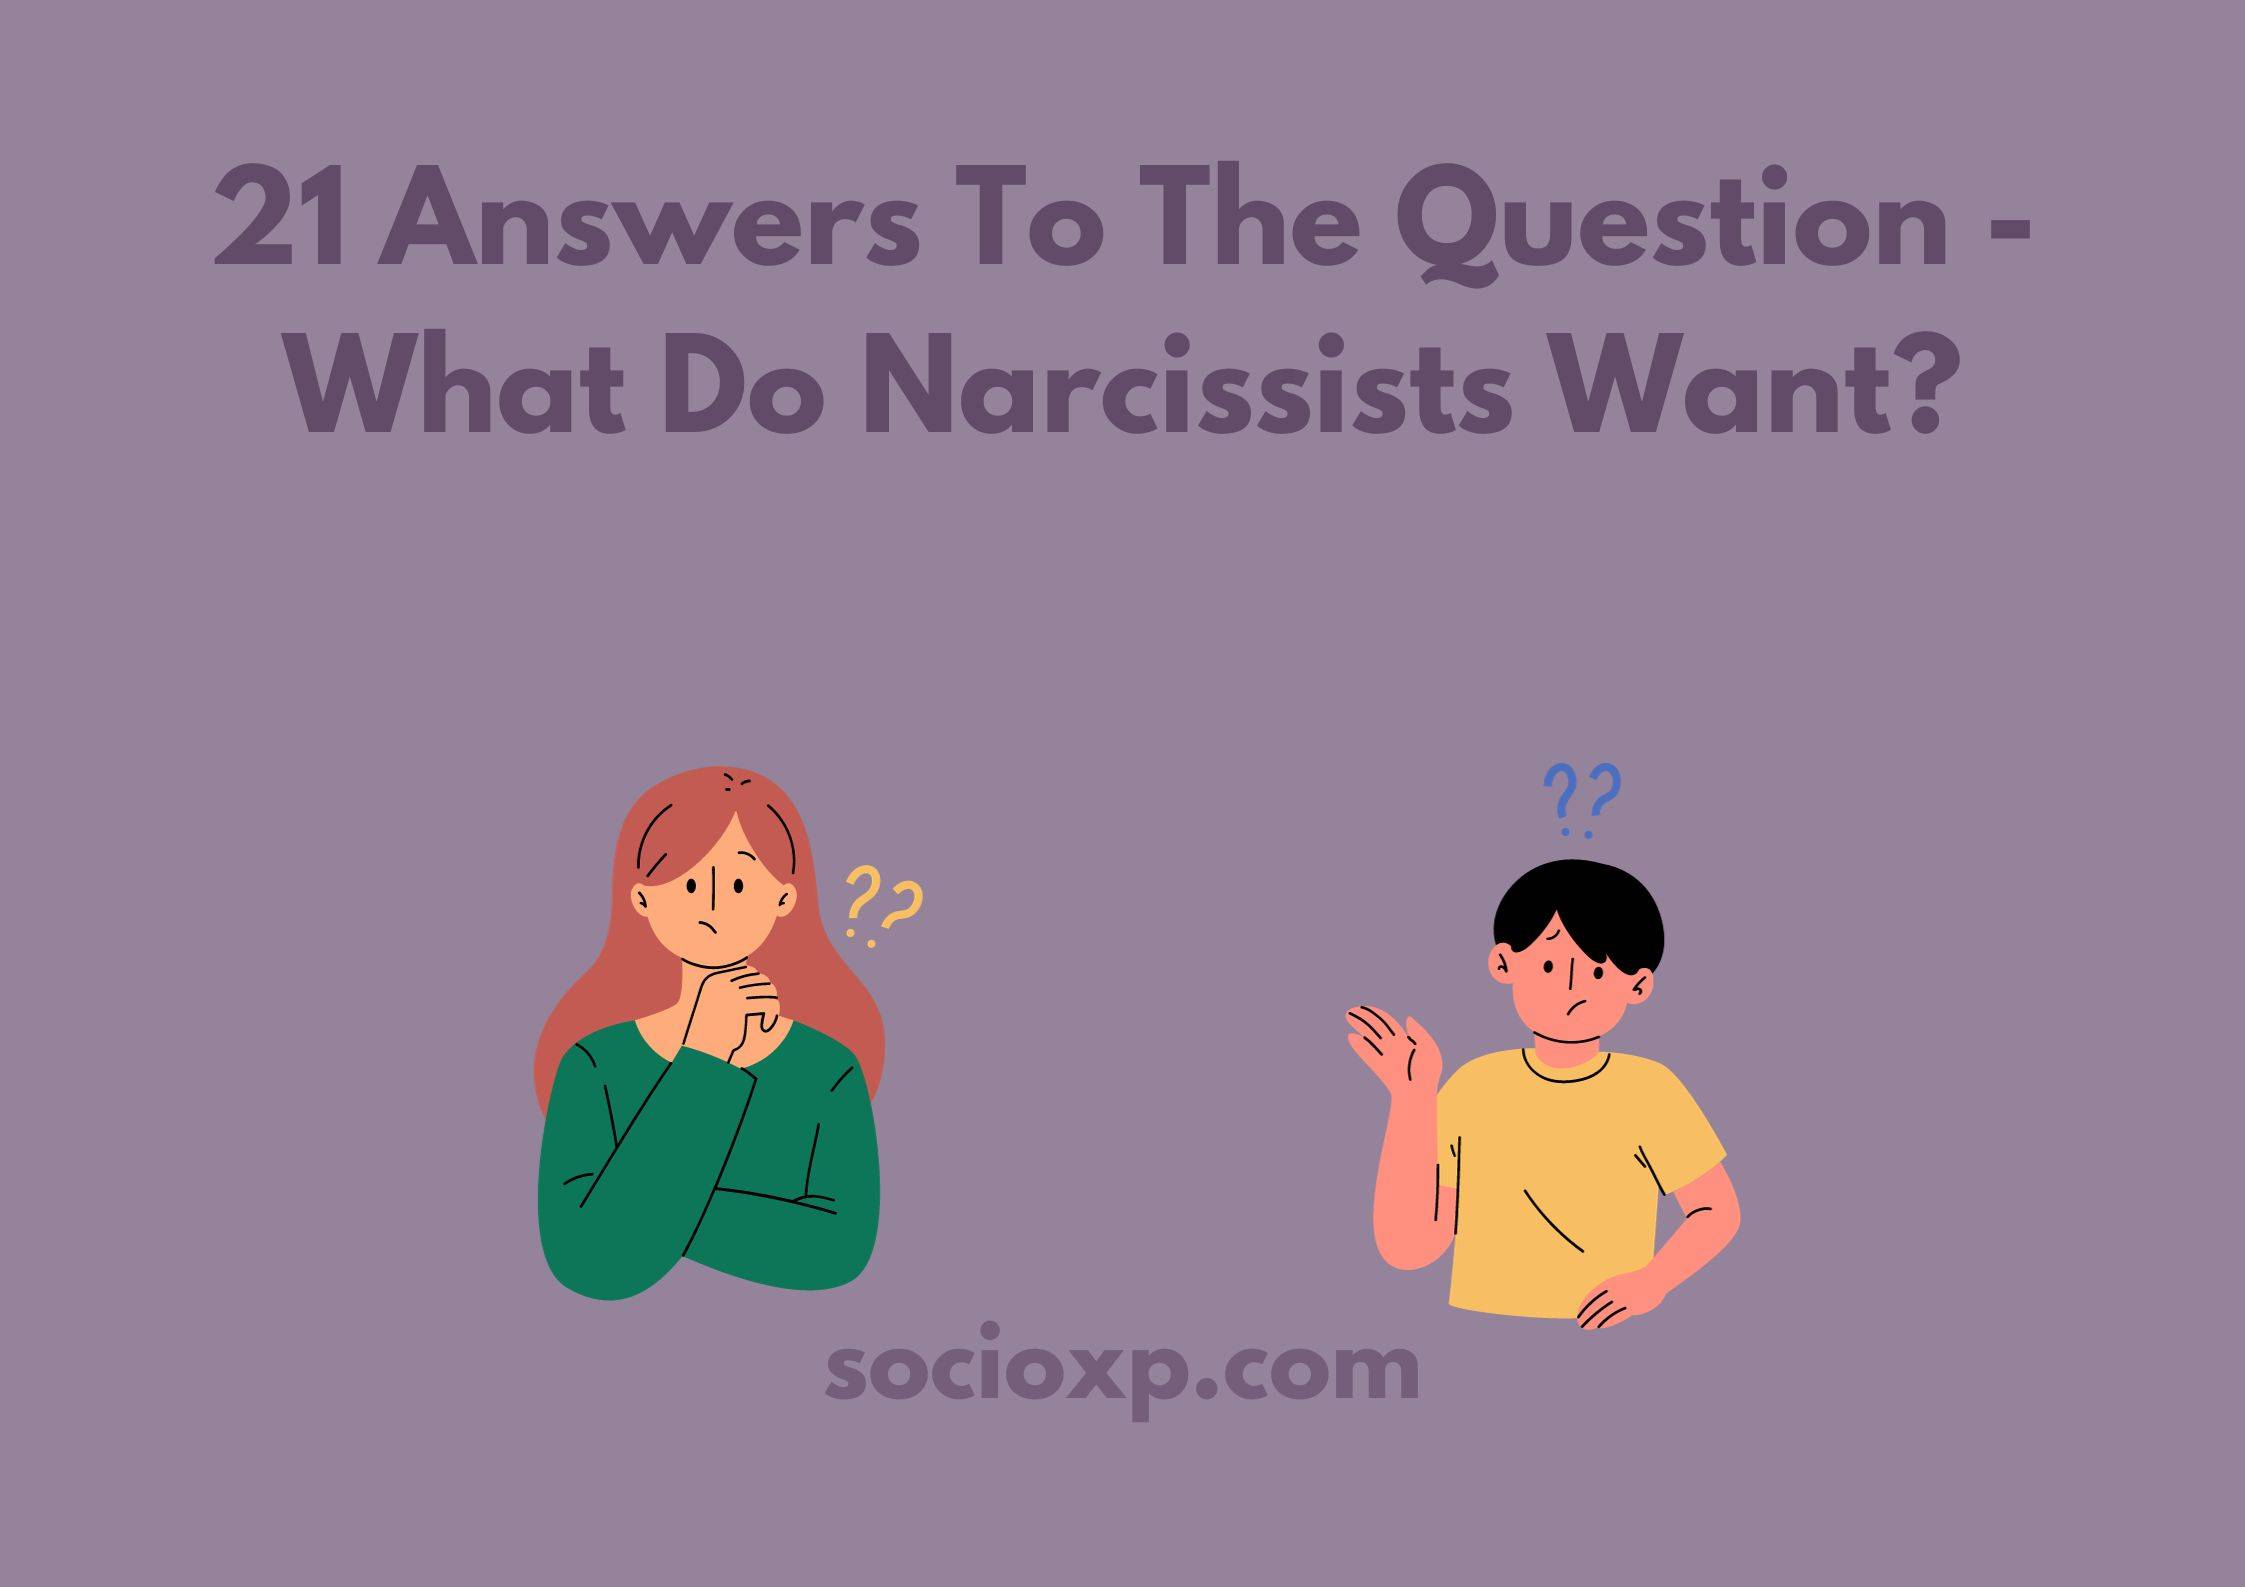 21 Answers To The Question - What Do Narcissists Want?